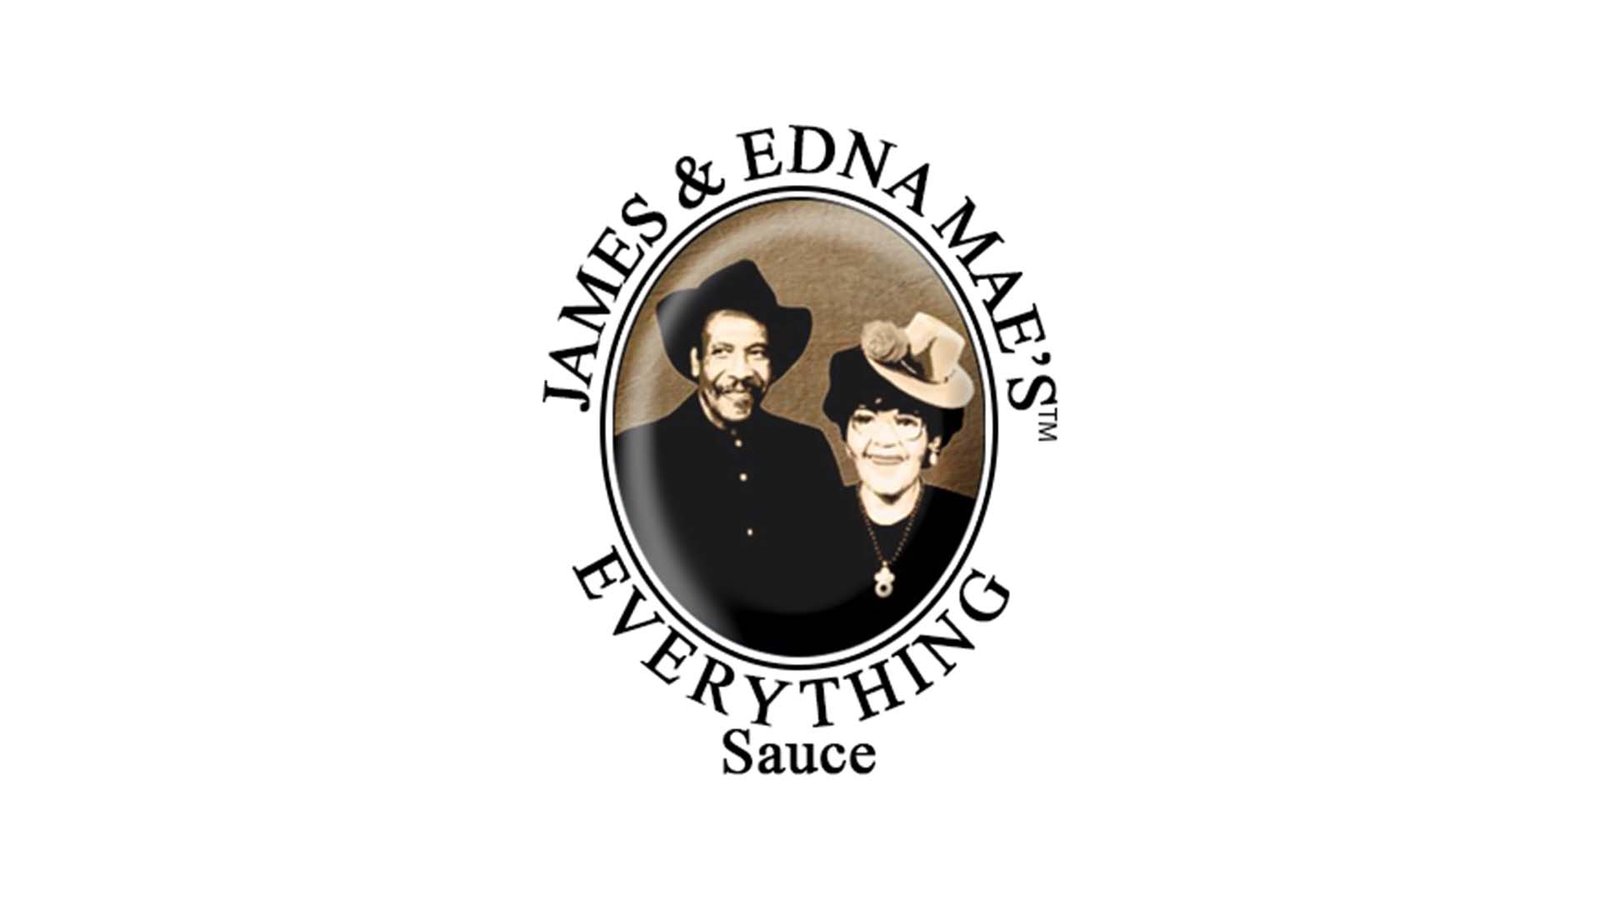 Our co-packing customer, James & Edna Mae's Everything Sauce Logo